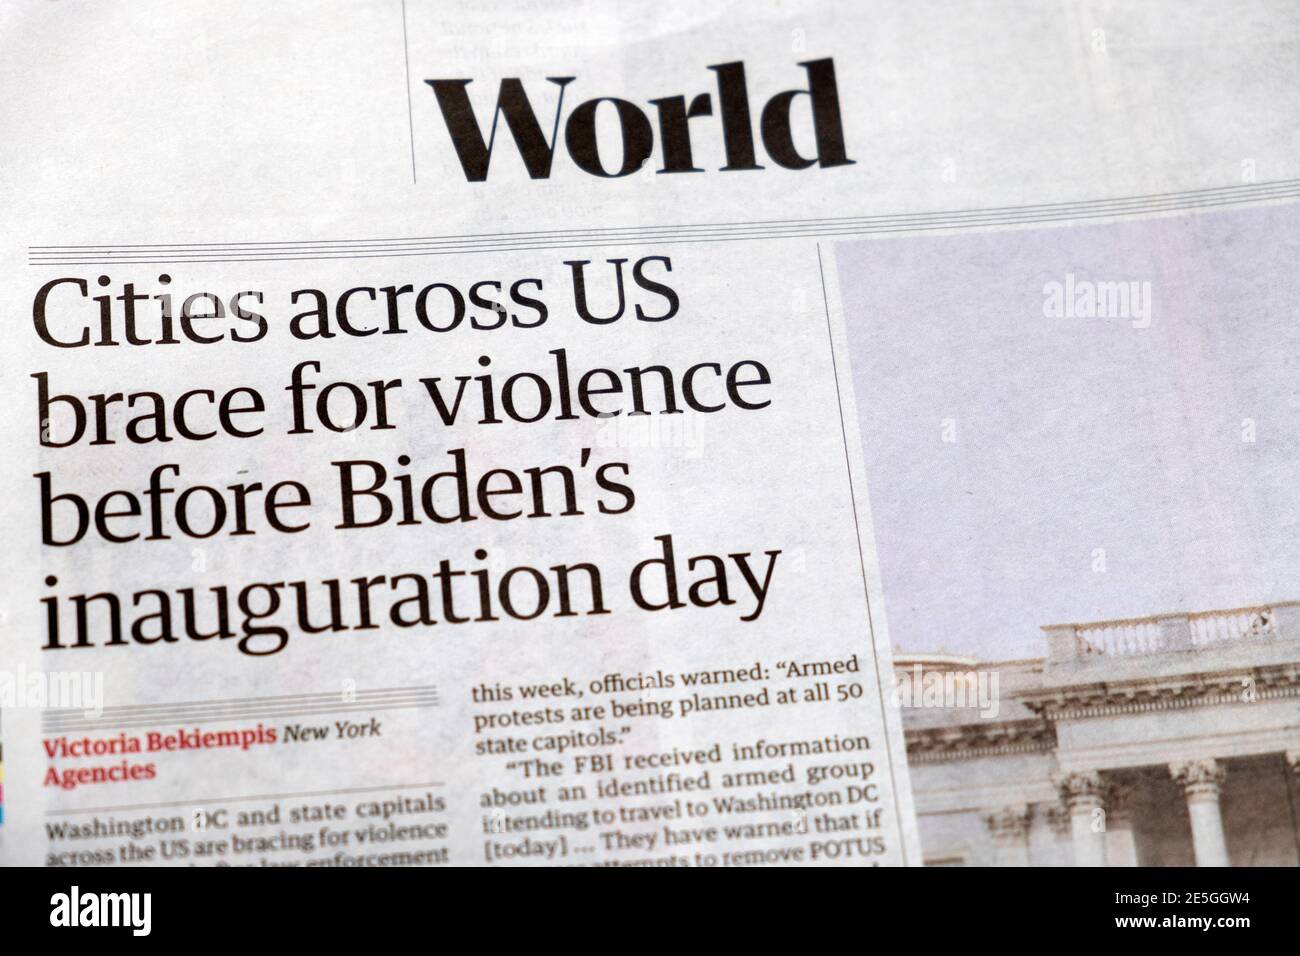 'Cities across US brace for violence before Biden's inauguration day' Guardian America news headline newspaper article inside page on 16 January 2021 Stock Photo